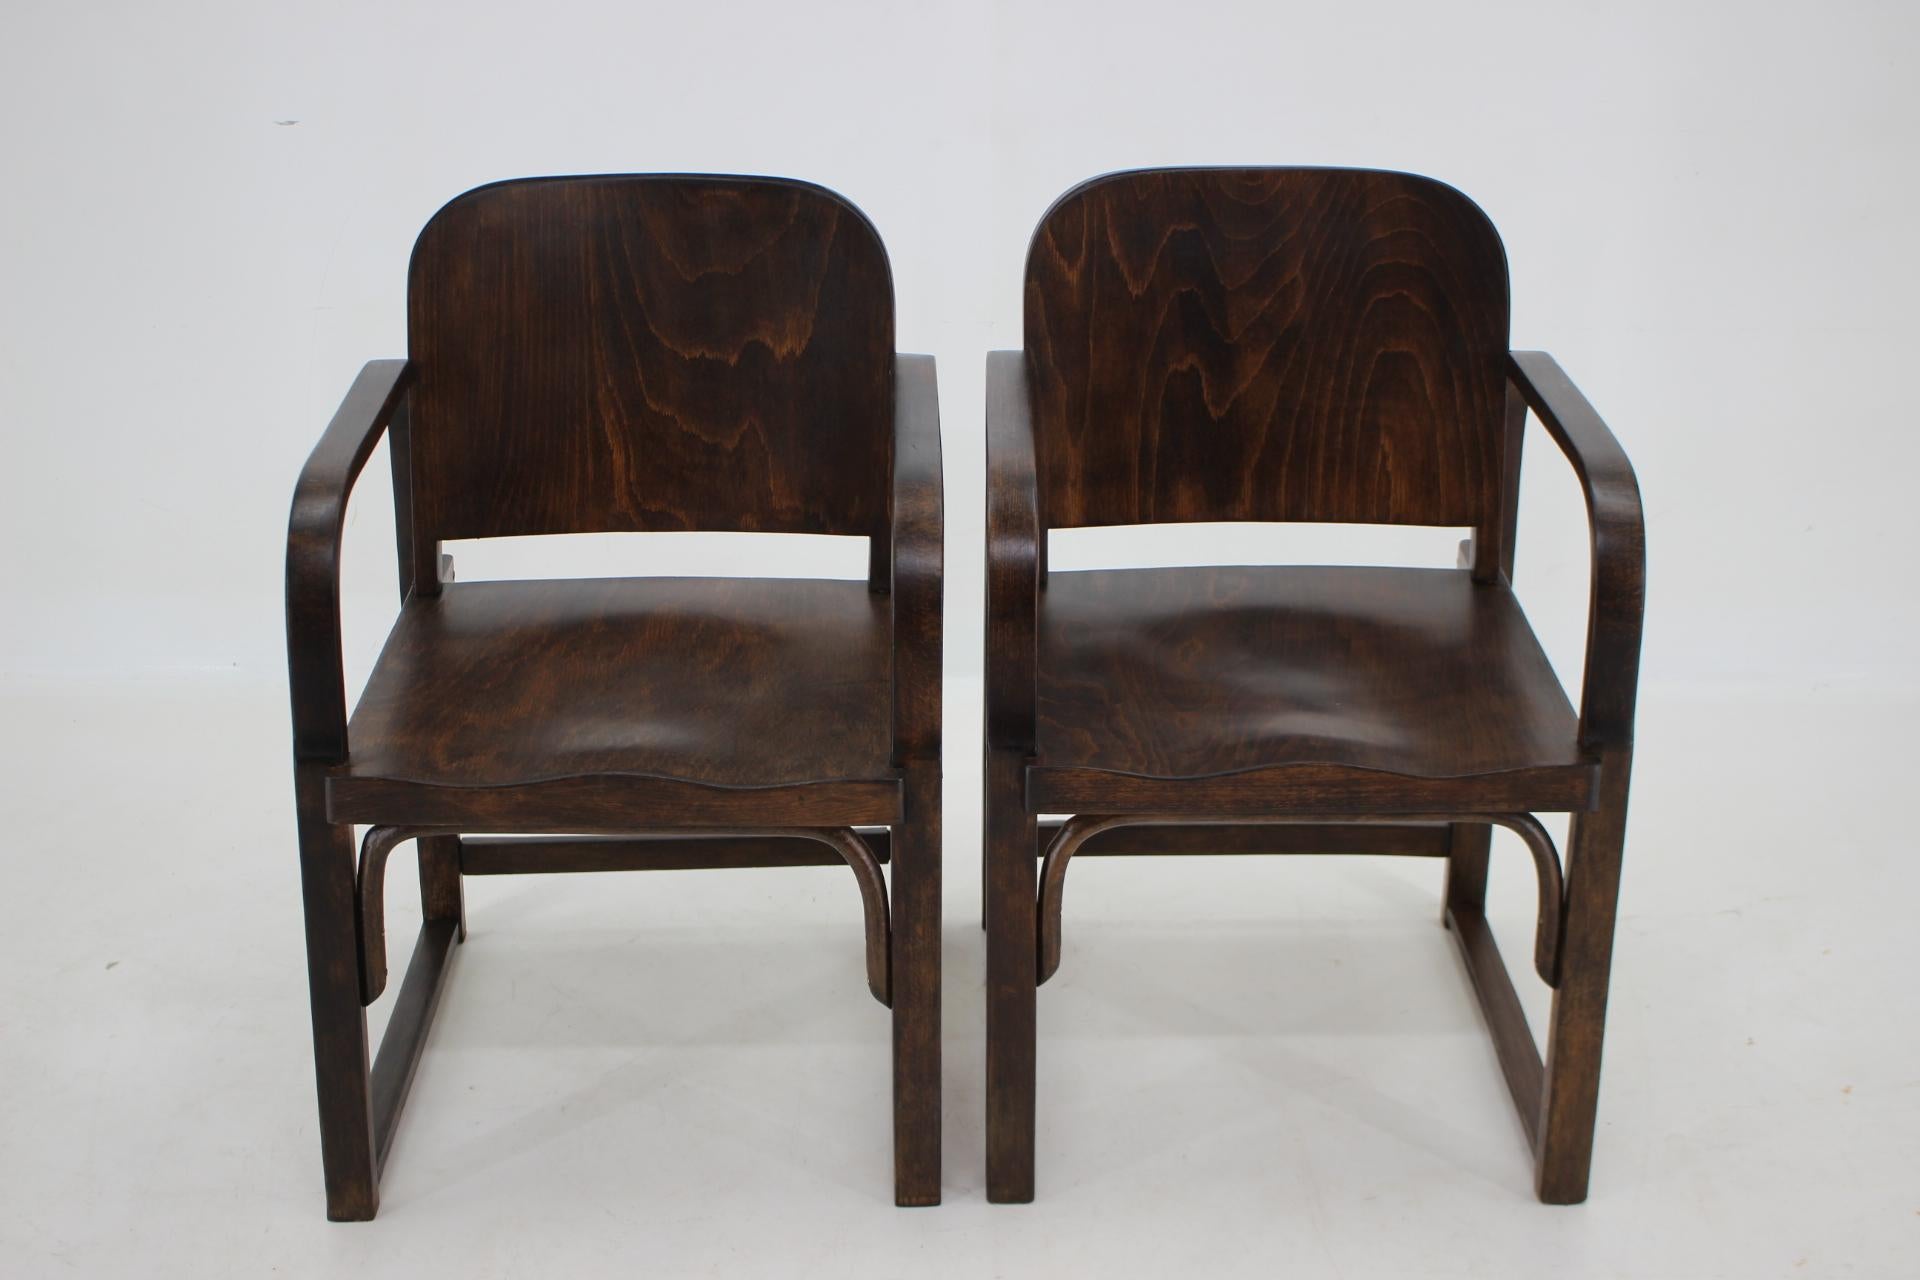 1930s Pair of Thonet Bentwood Armchairs A745 by Tatra, Czechoslovakia In Good Condition For Sale In Praha, CZ